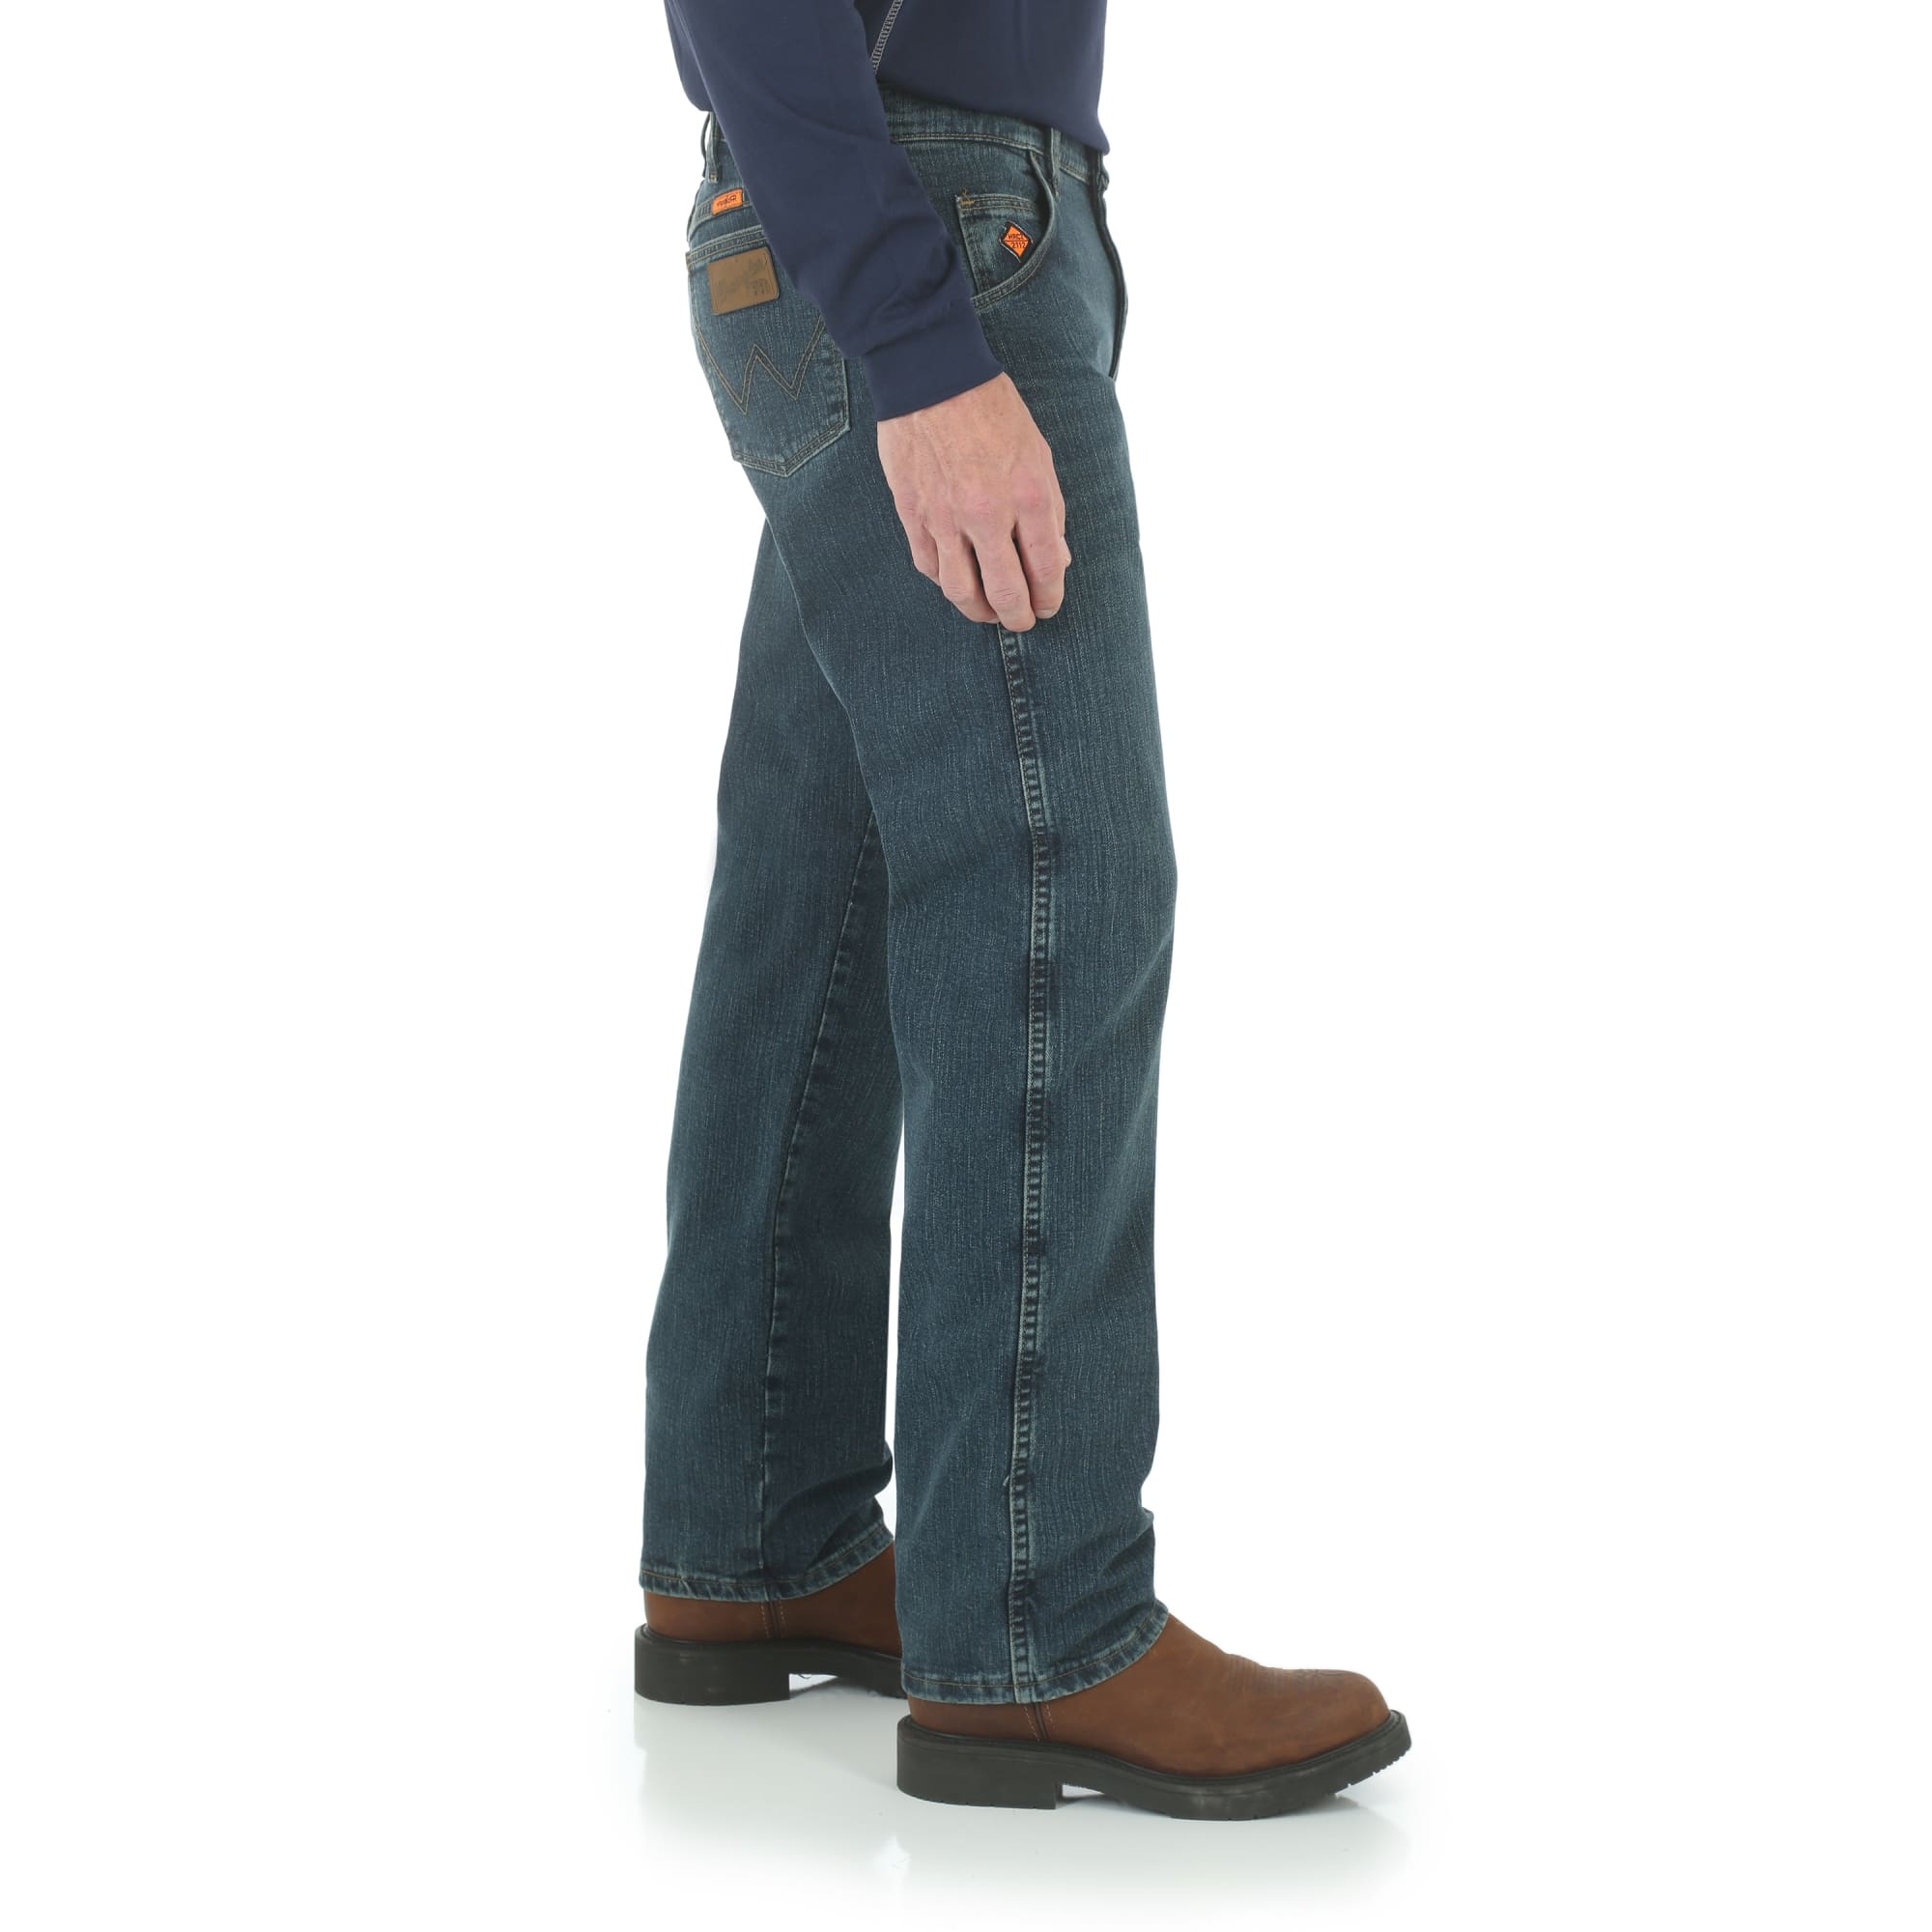 wrangler advanced comfort relaxed fit jeans